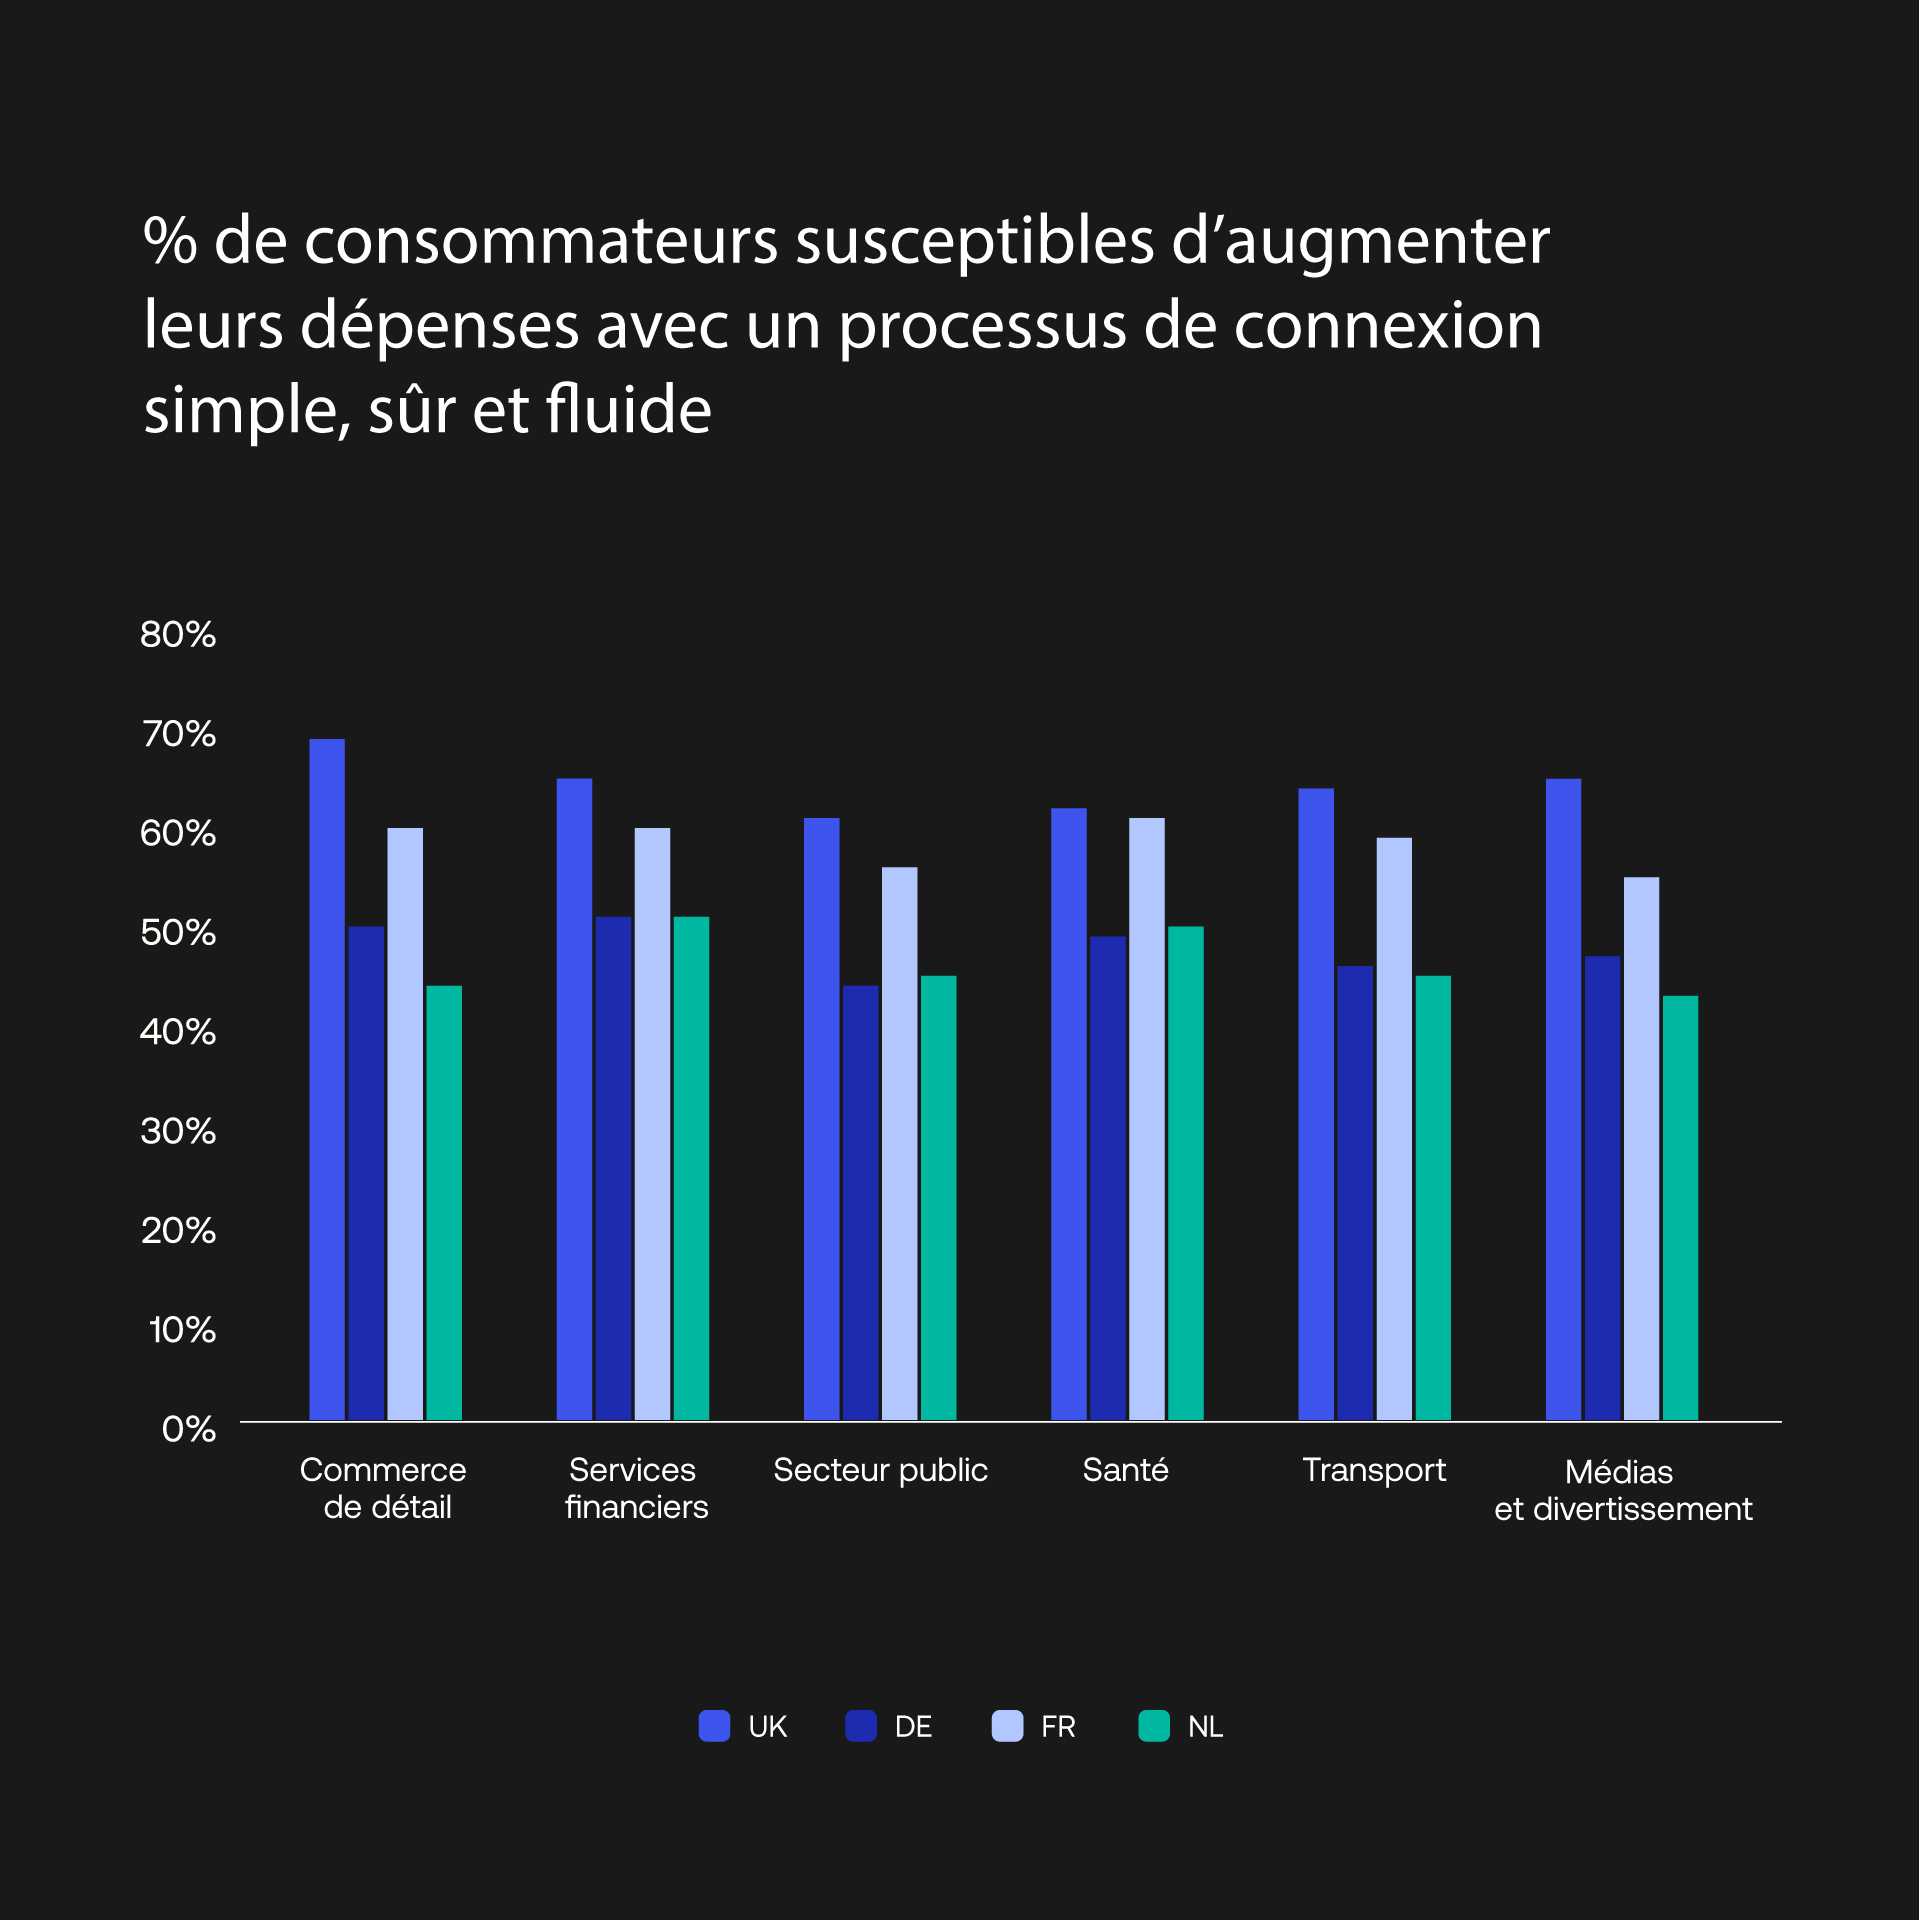 Share of consumers likely to spend more with simple, secure and frictionless login